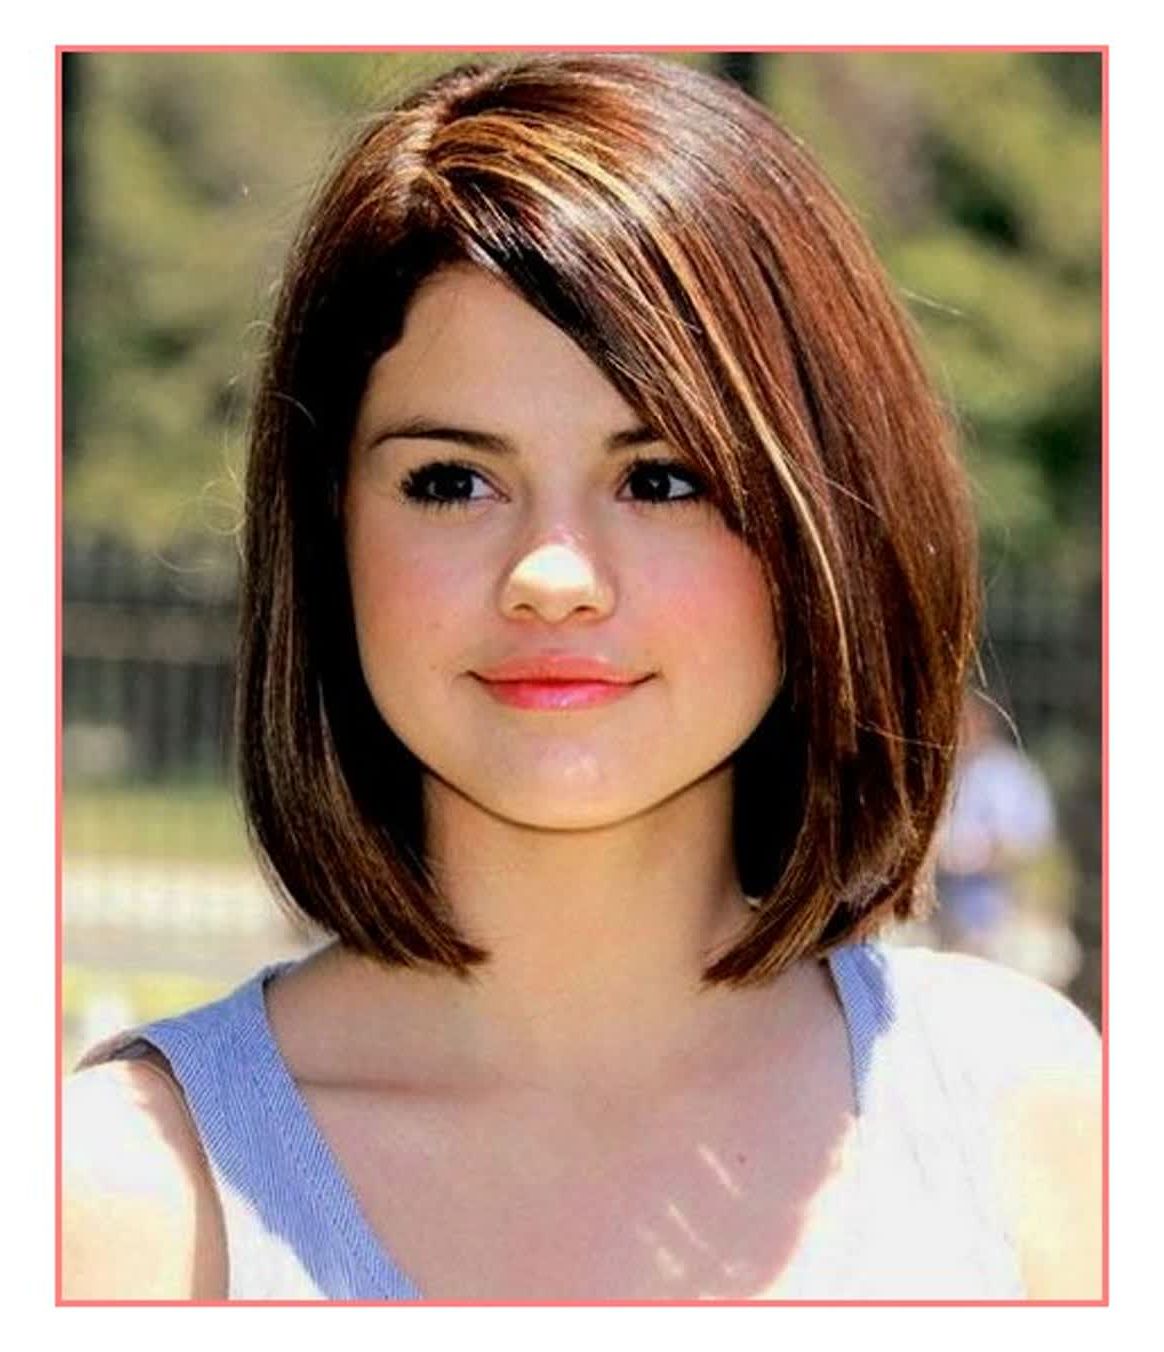 Hair Cuts : Shoulder Length Haircuts For Women Wonderful Medium Pertaining To Famous Medium Hairstyles For Women With Round Face (View 10 of 20)